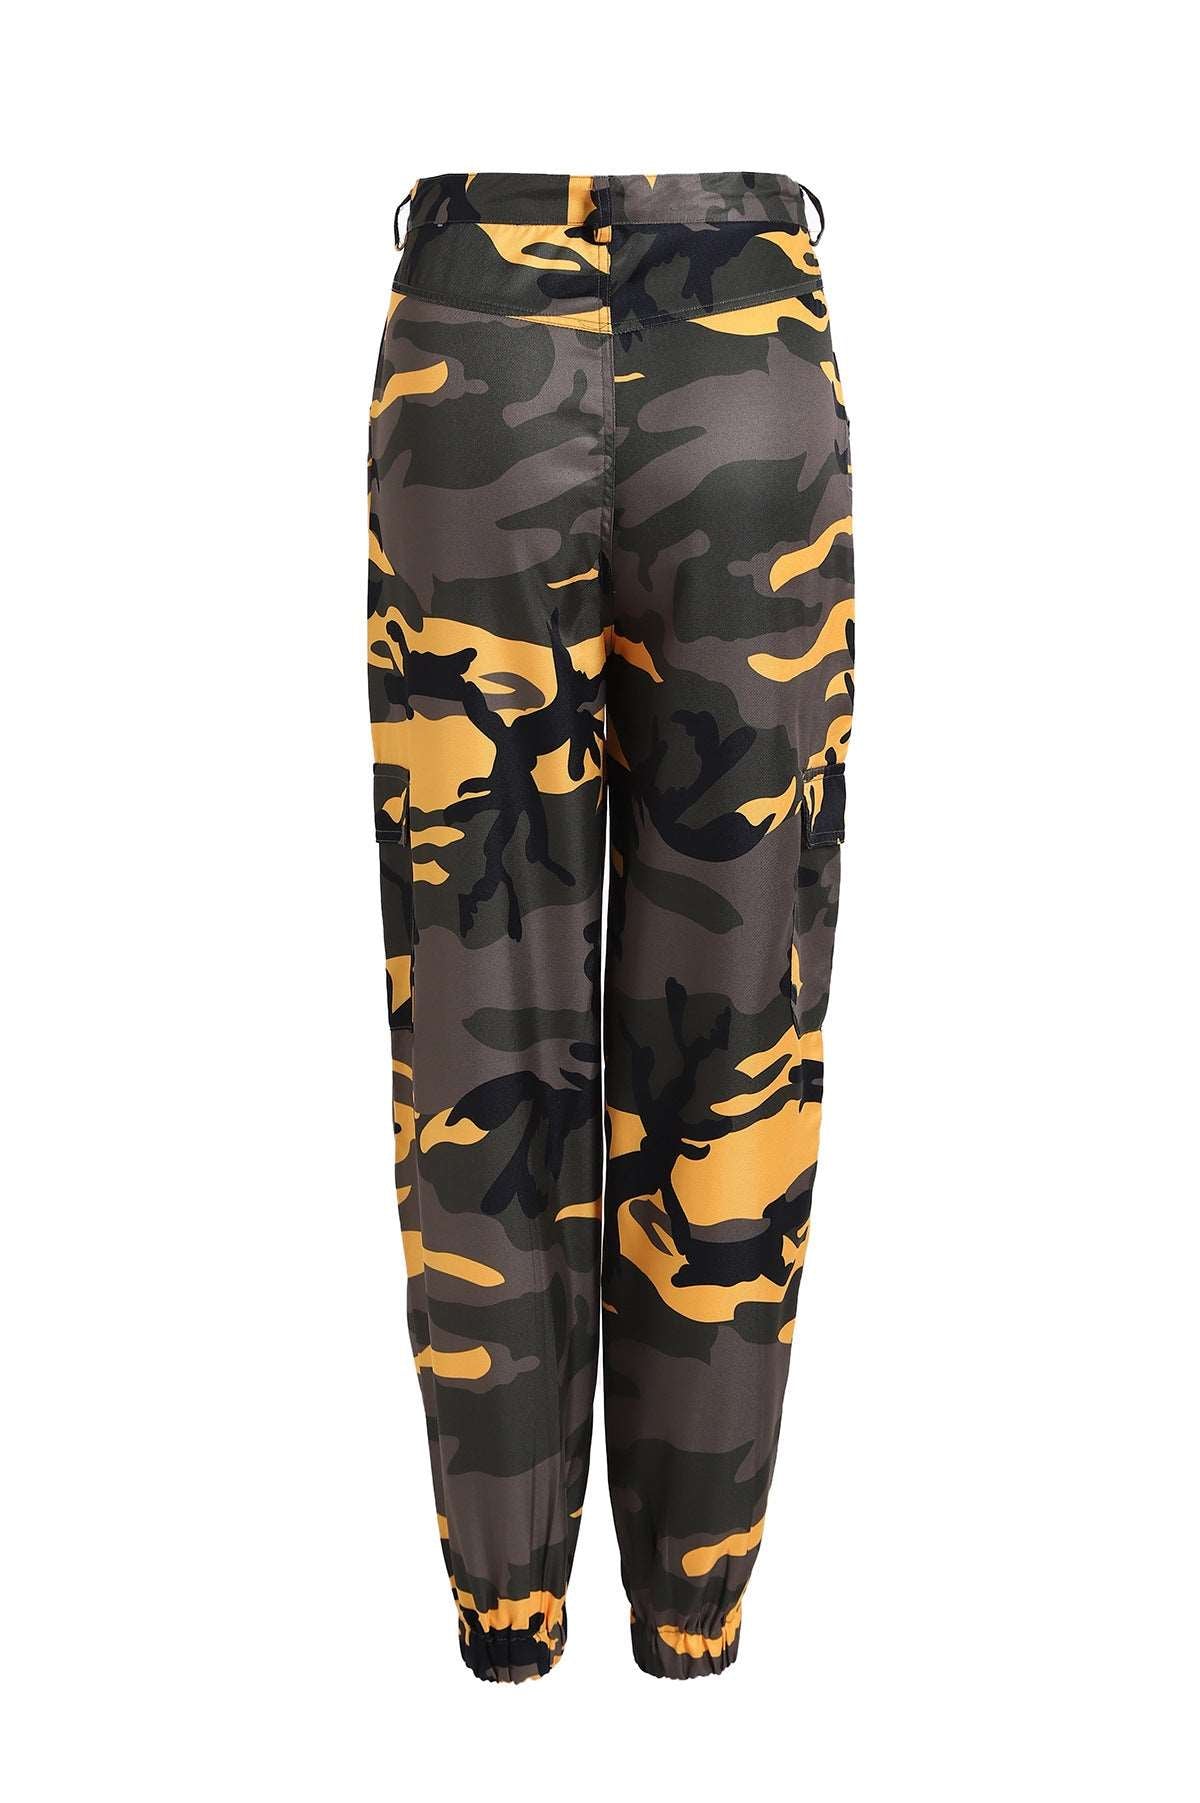 Tough Tasks, Easy Wear Quality Fabric Camouflage Bottoms with Spandex